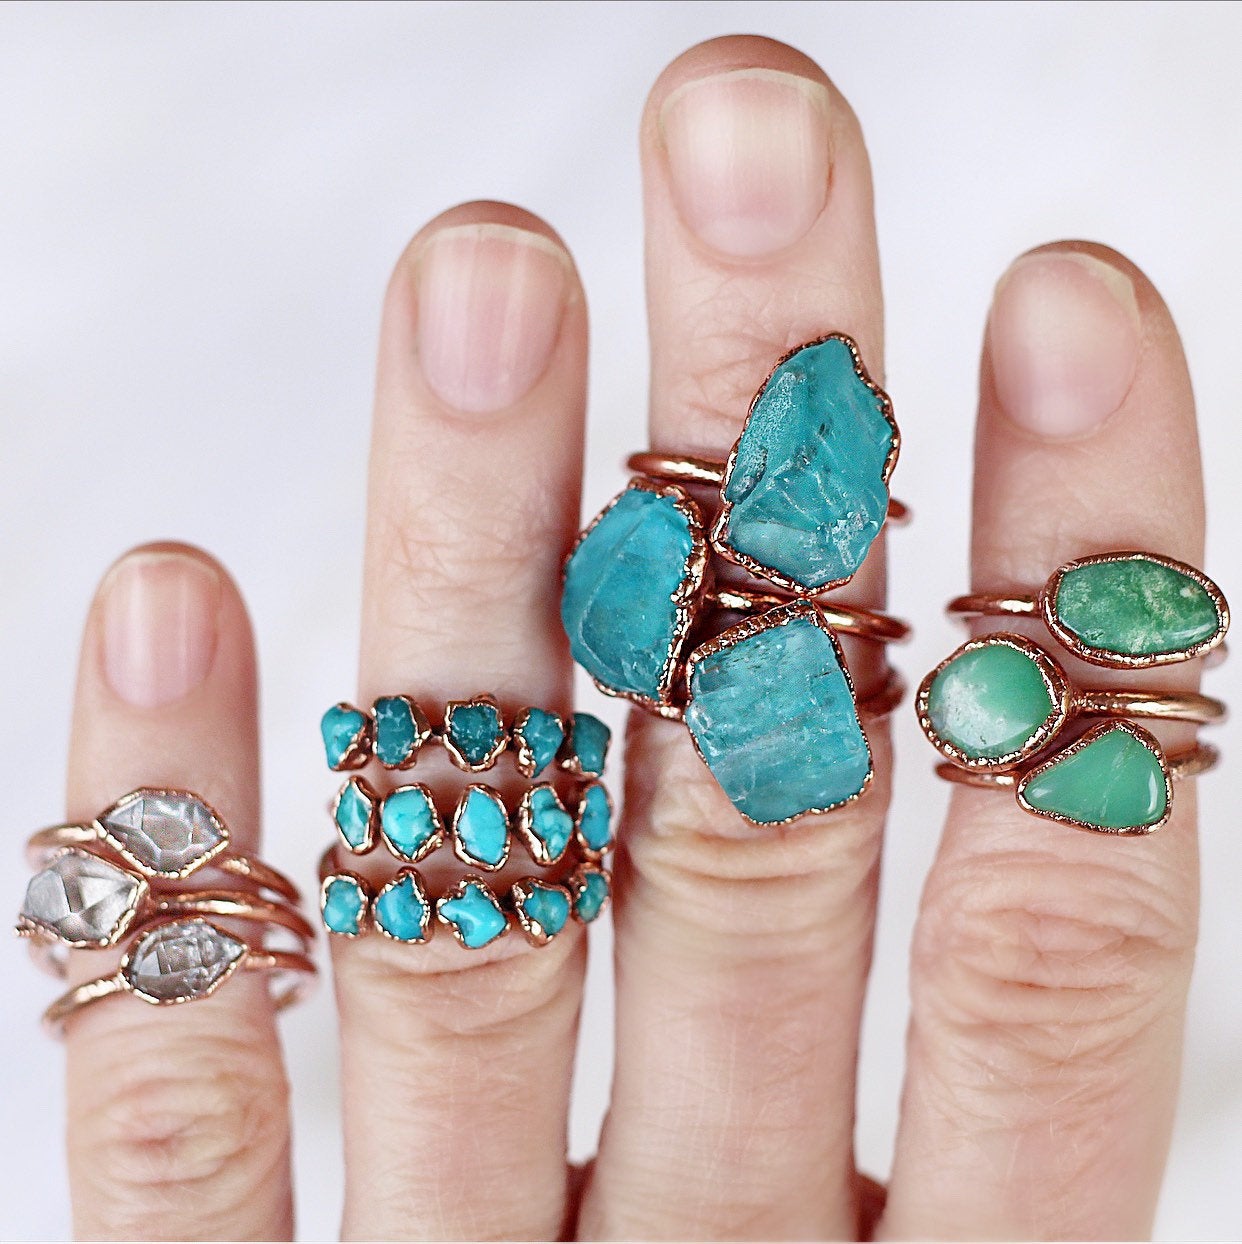 Raw Chrysoprase Ring show worn with other available stacking rings and multi stone stacking rings